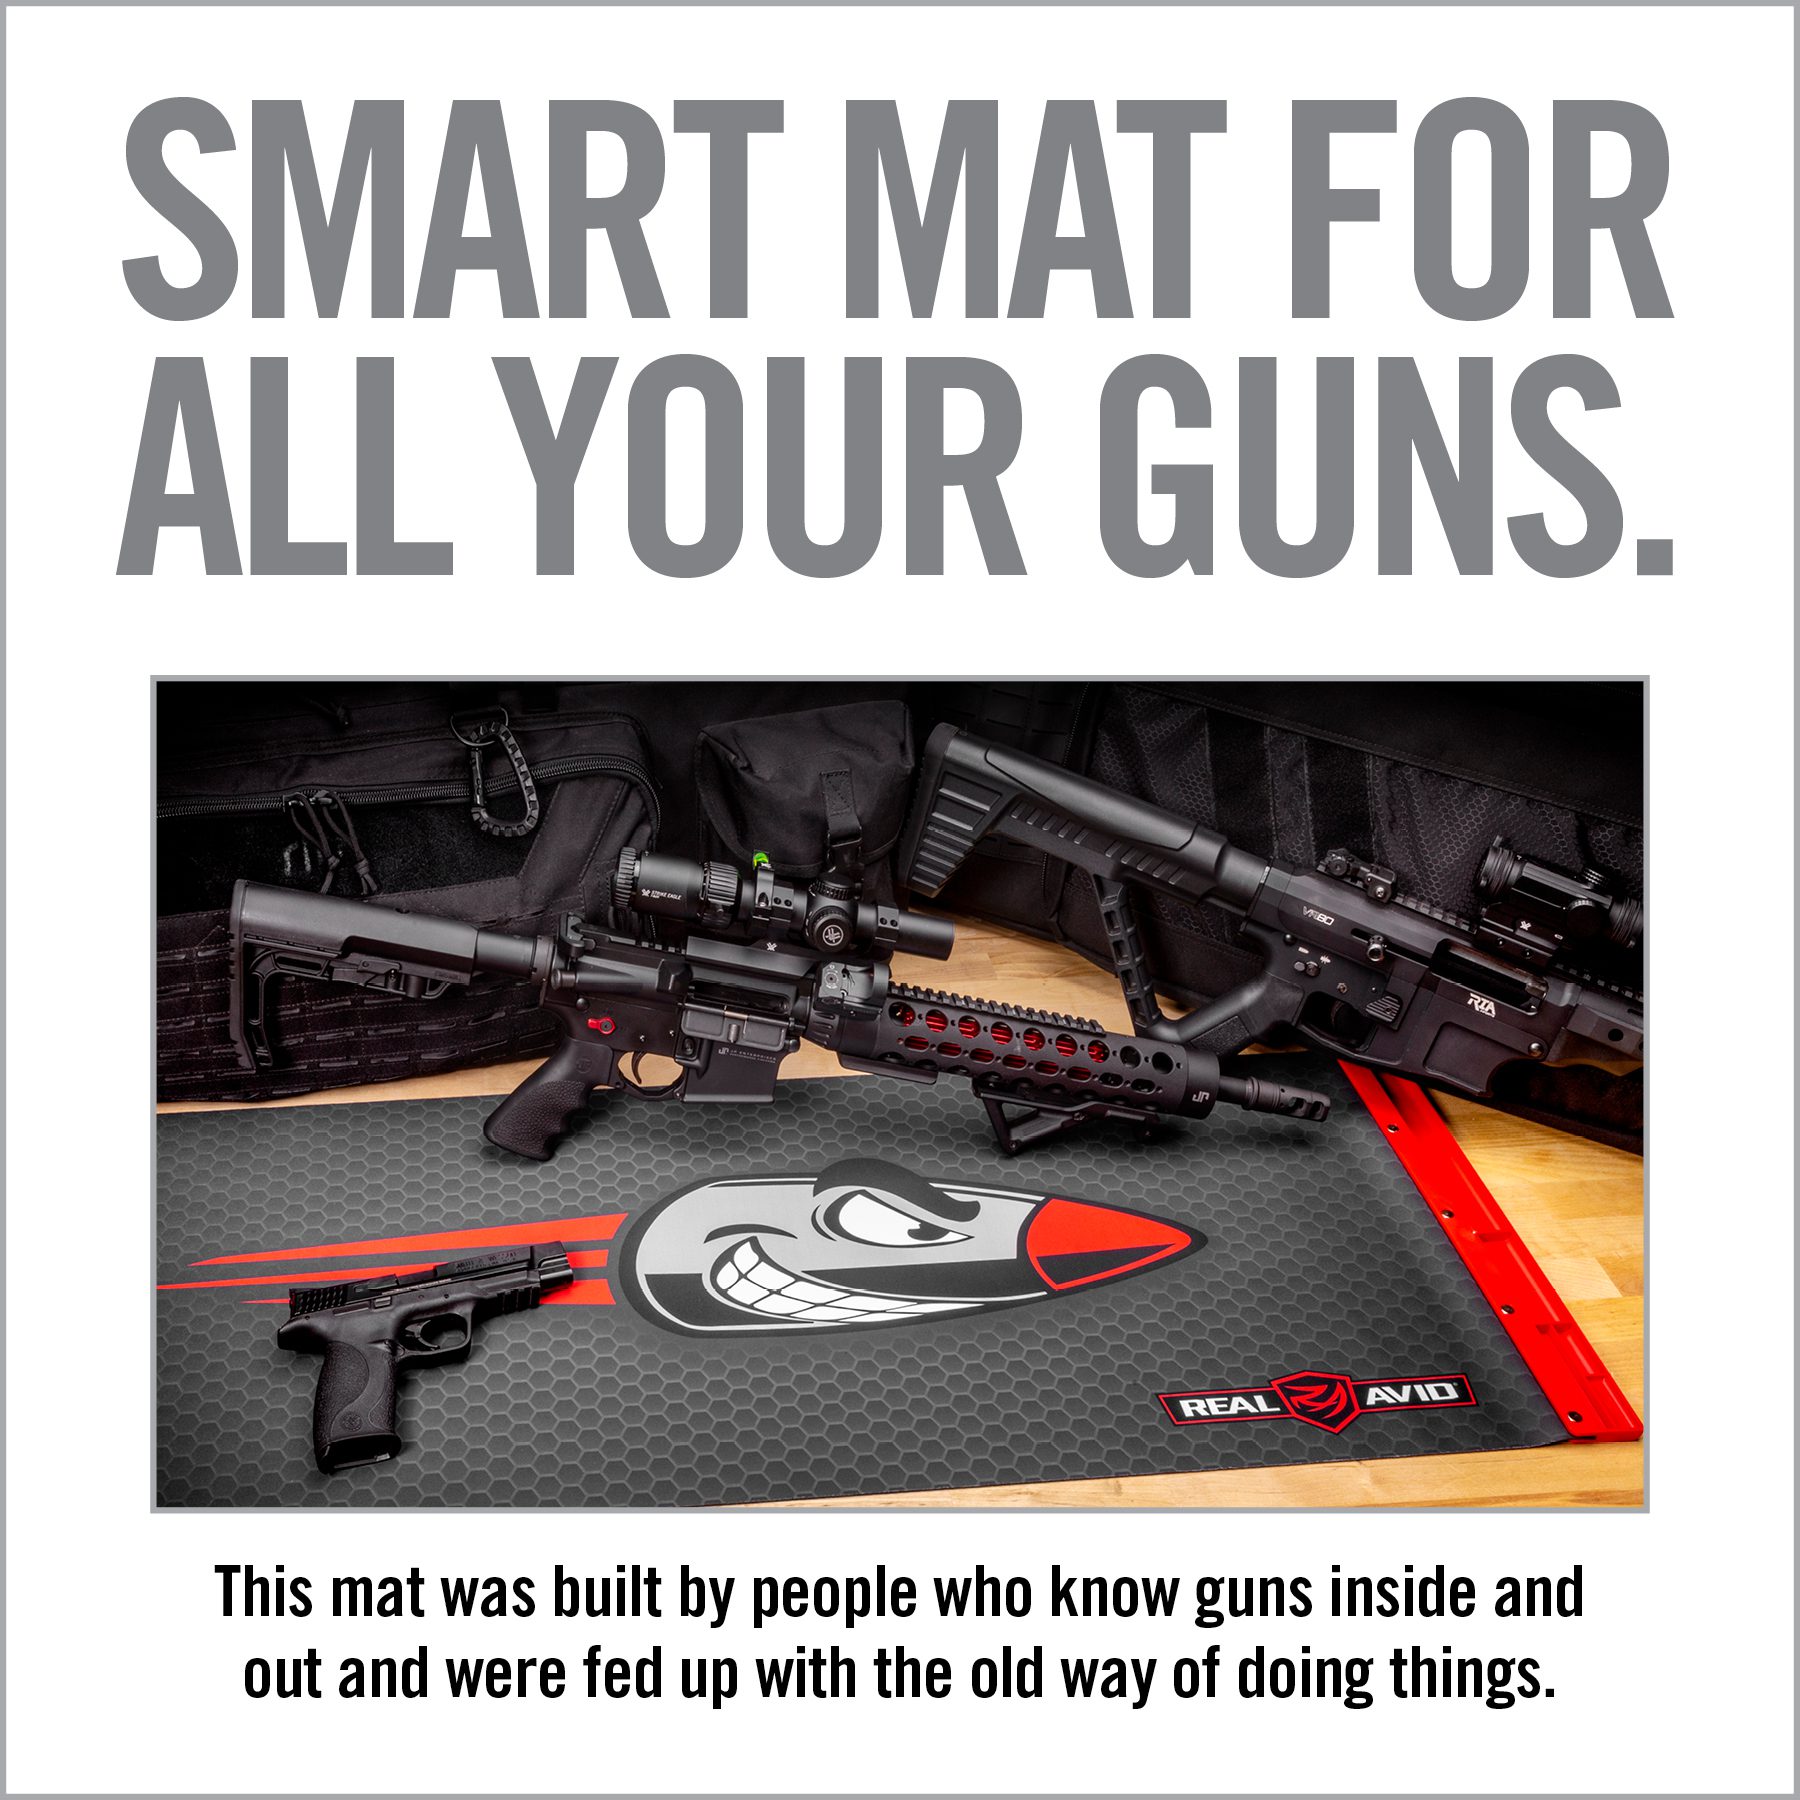  Real Avid Universal Smart Mat - 43x16”, Large Gun Cleaning Mat  With Integrated Red Parts Tray, Gun Oil Resistant, Non-Slip, Padded Cleaning  Mat, Great Rifle Cleaning Mat for Gun Cleaning